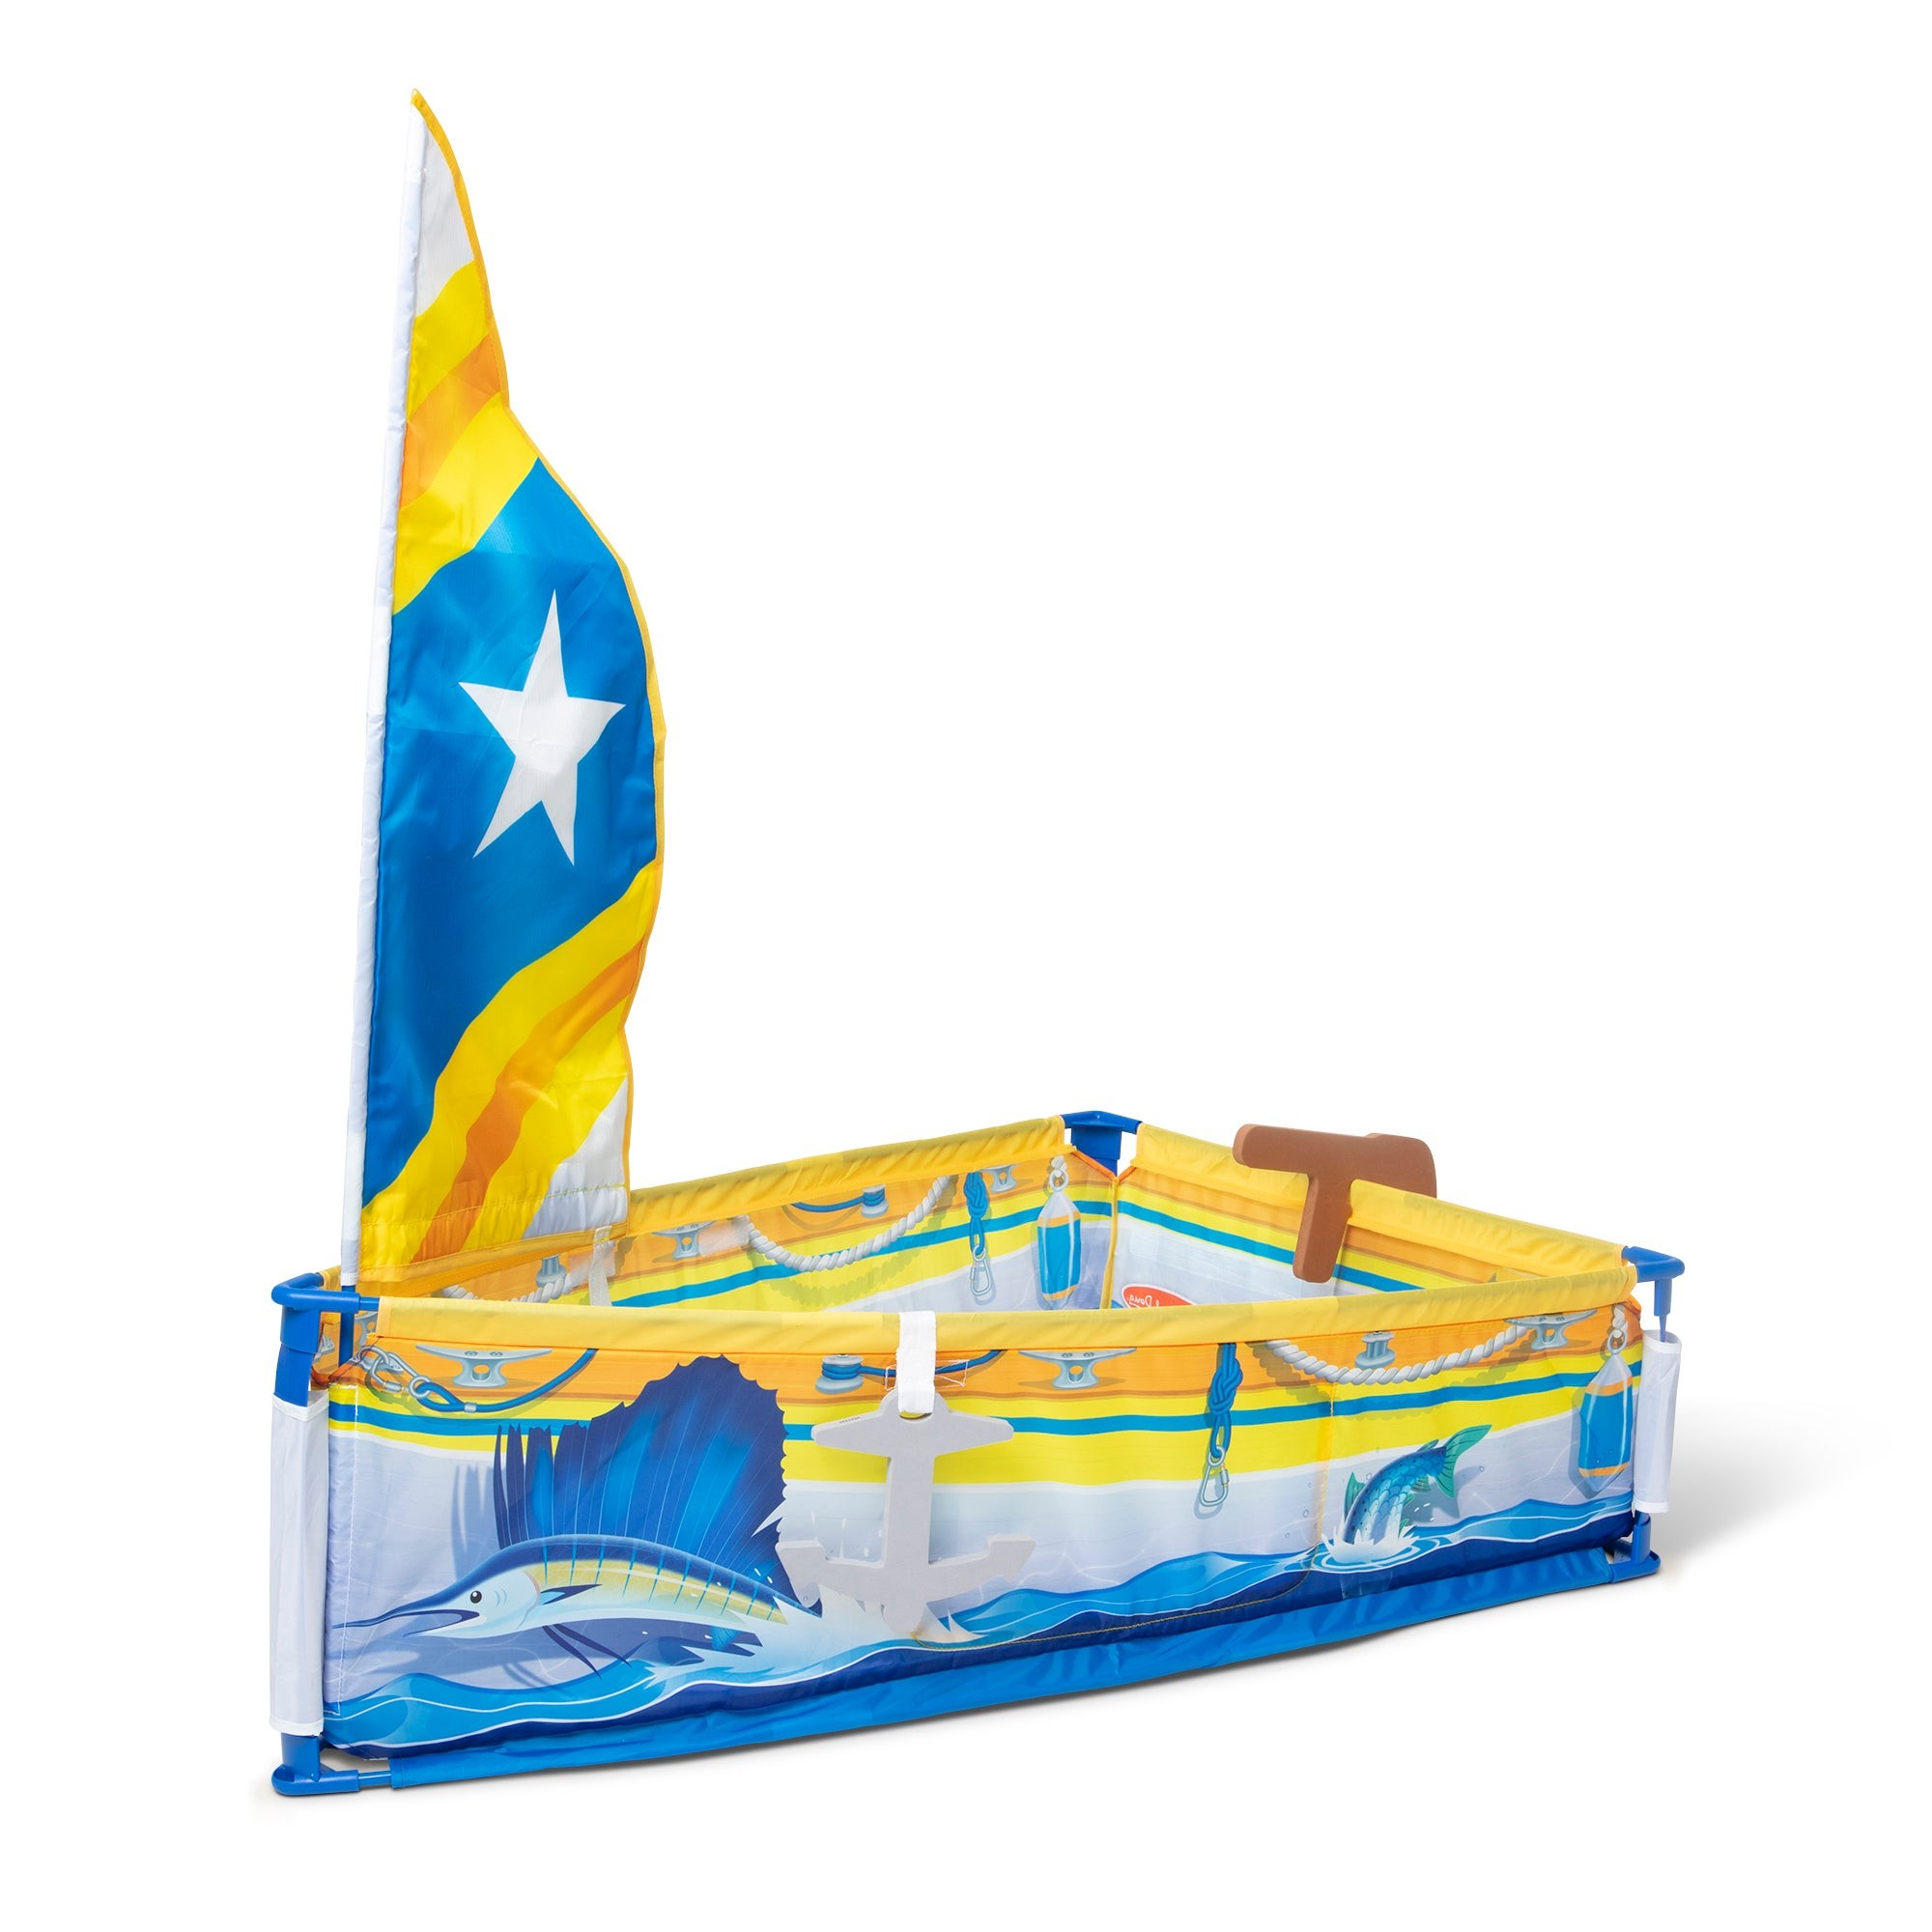 Let's Explore Sailboat Playset, Ages 3+ Years